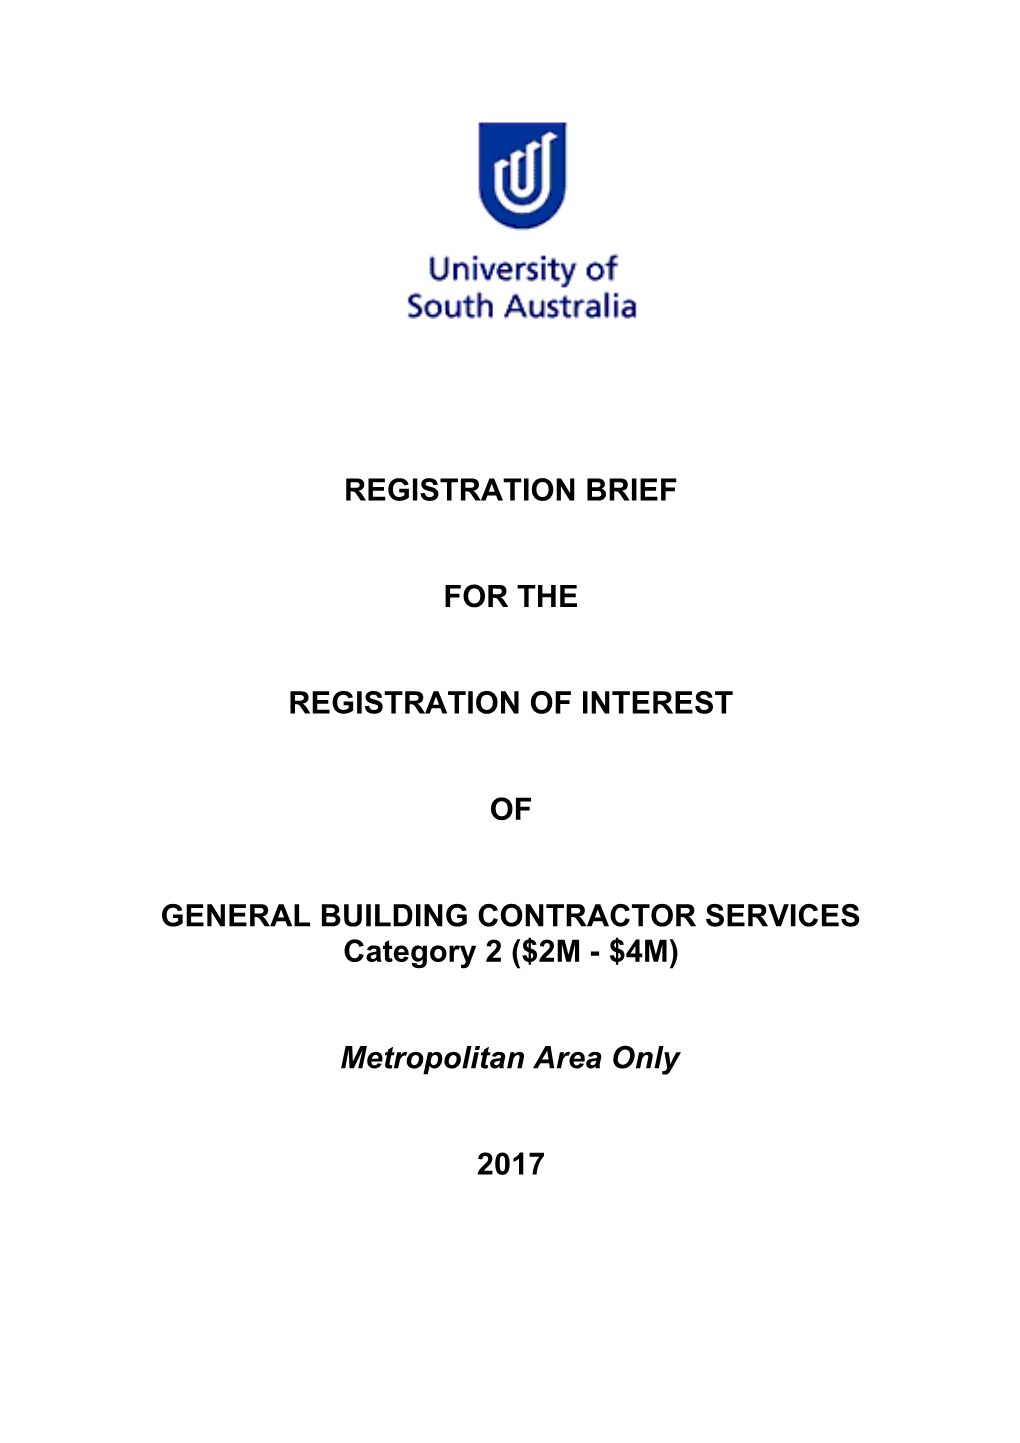 Registration of Interest for General Building Contractor Services Category 2($2M - $4M)